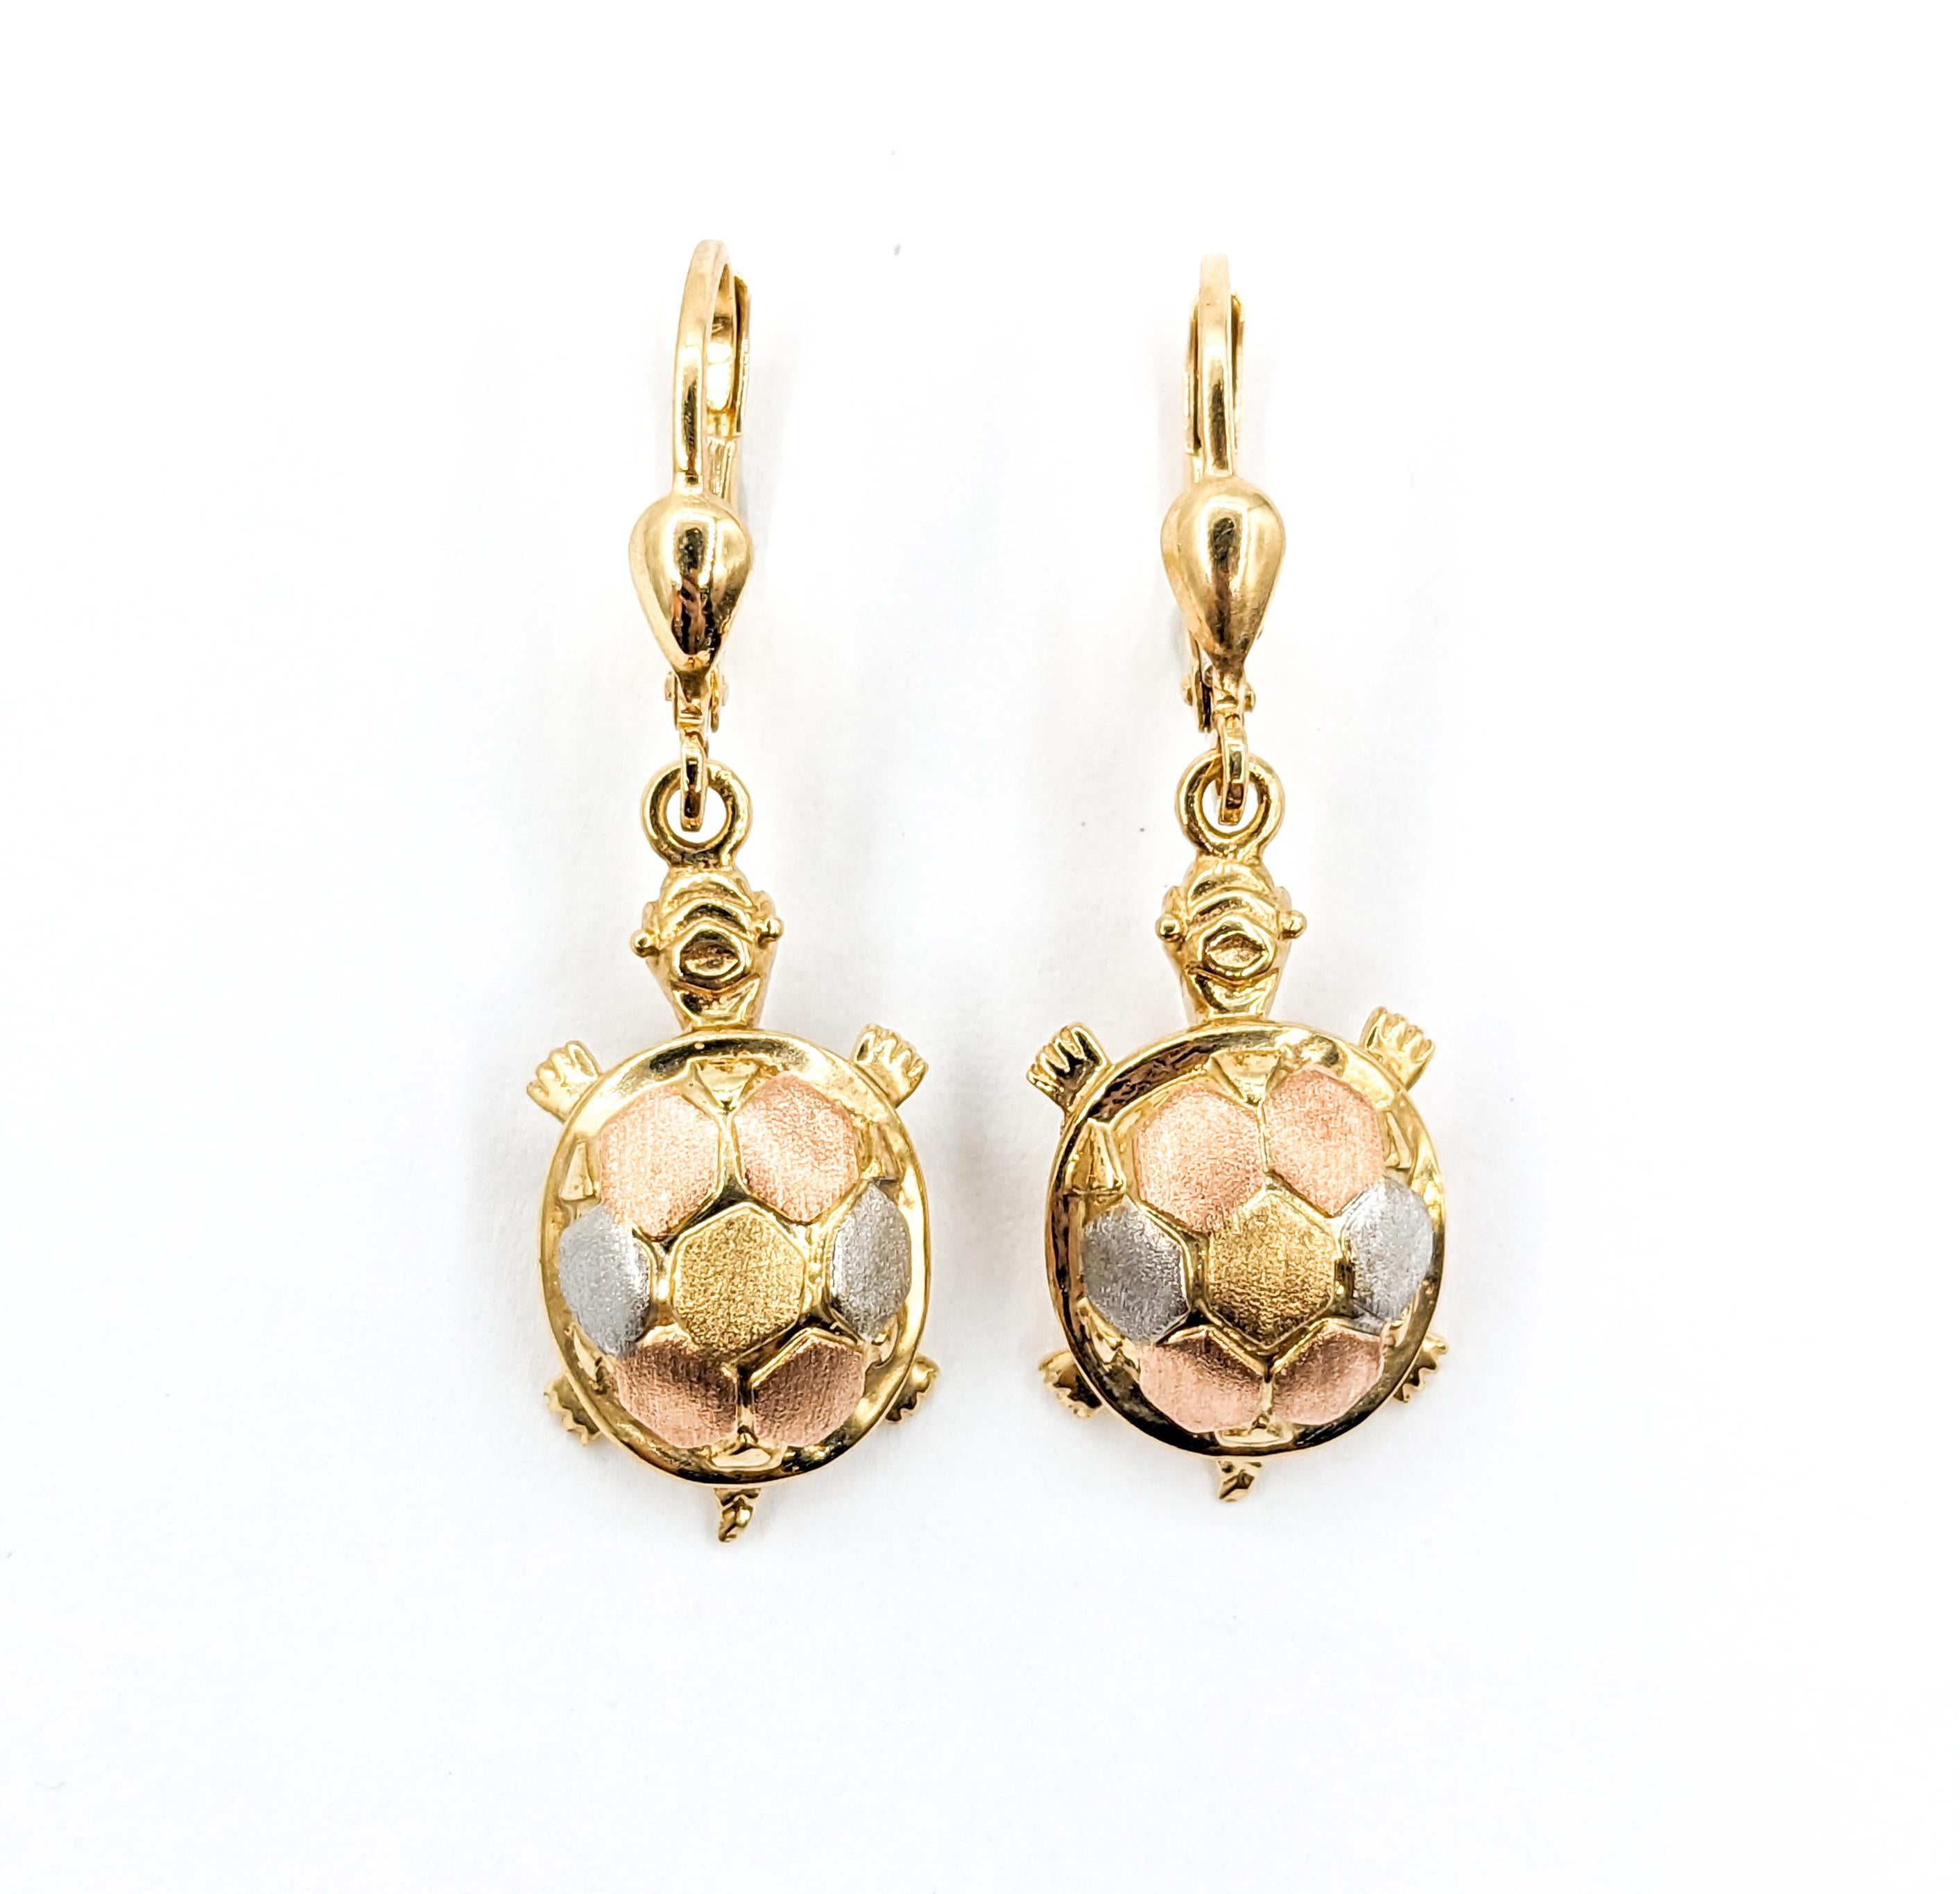 Turtle Dangle Earrings in Tri-Color Gold In Excellent Condition For Sale In Bloomington, MN